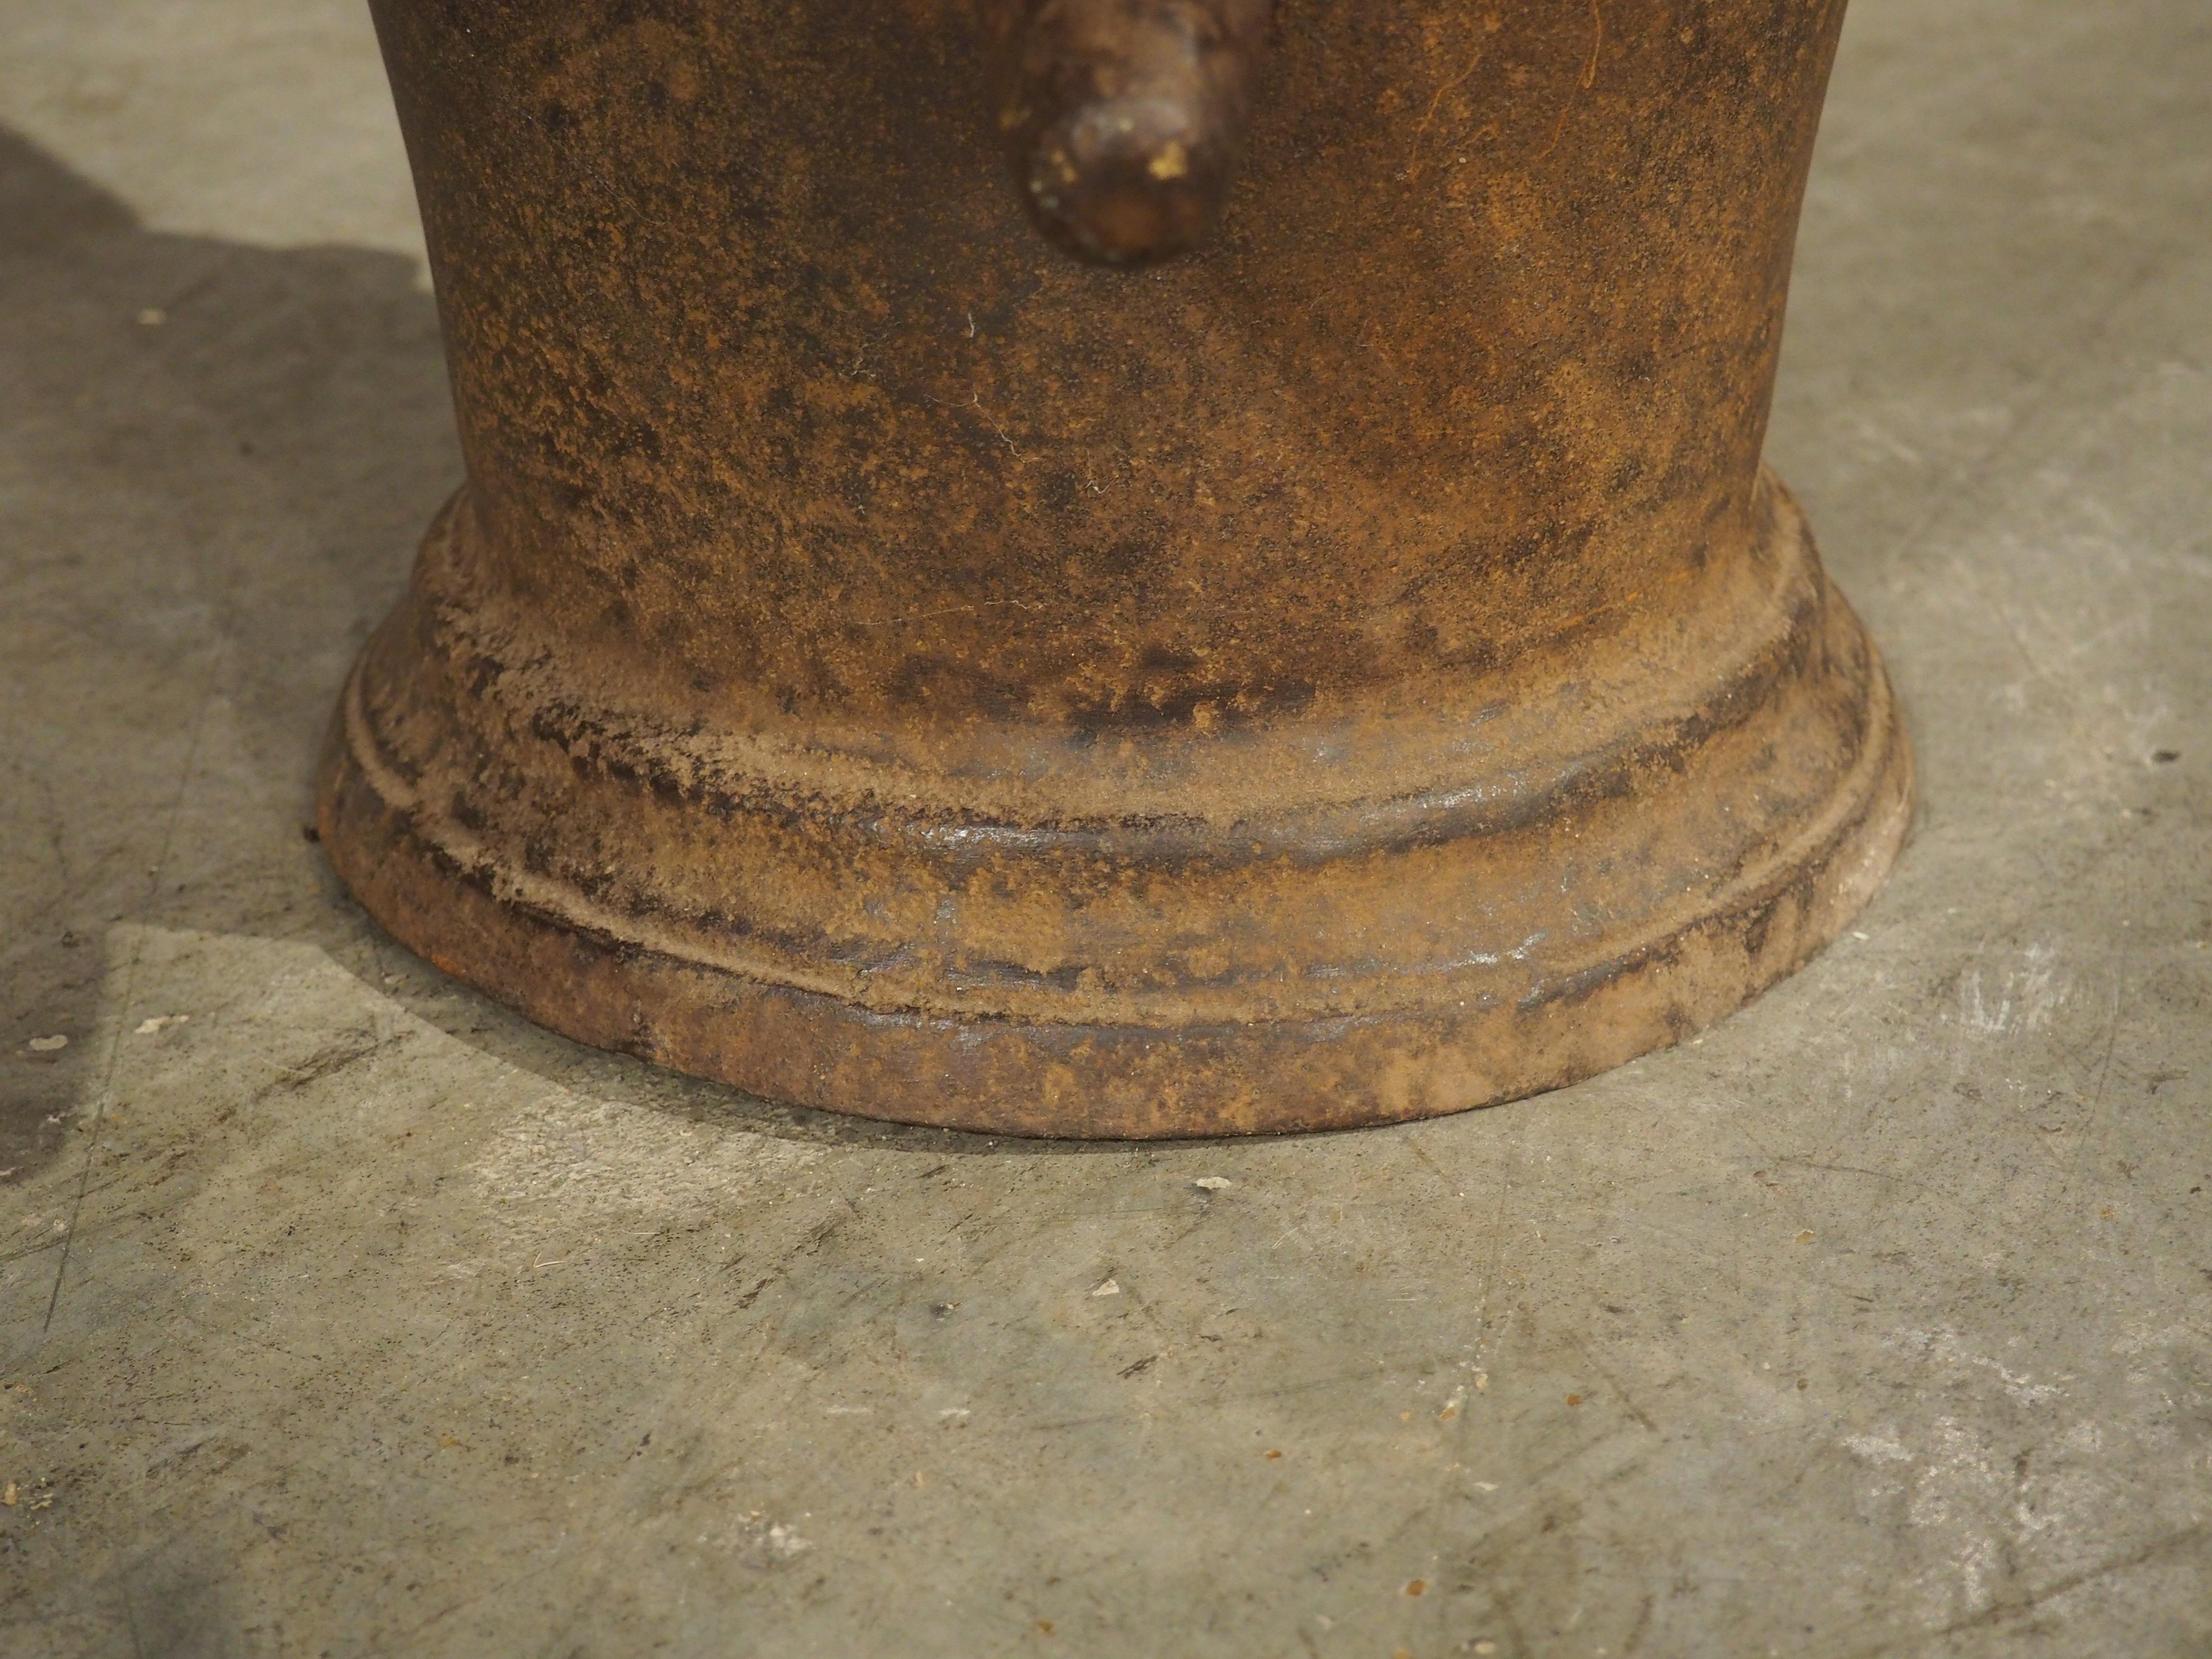 A unique example of the traditional French pharmacy mortar, this cast iron version is from circa 1800 and features a large wooden pestle (16 inches tall with a diameter of 2 ¾) with a lovely honey hue. The brown-colored iron has developed a